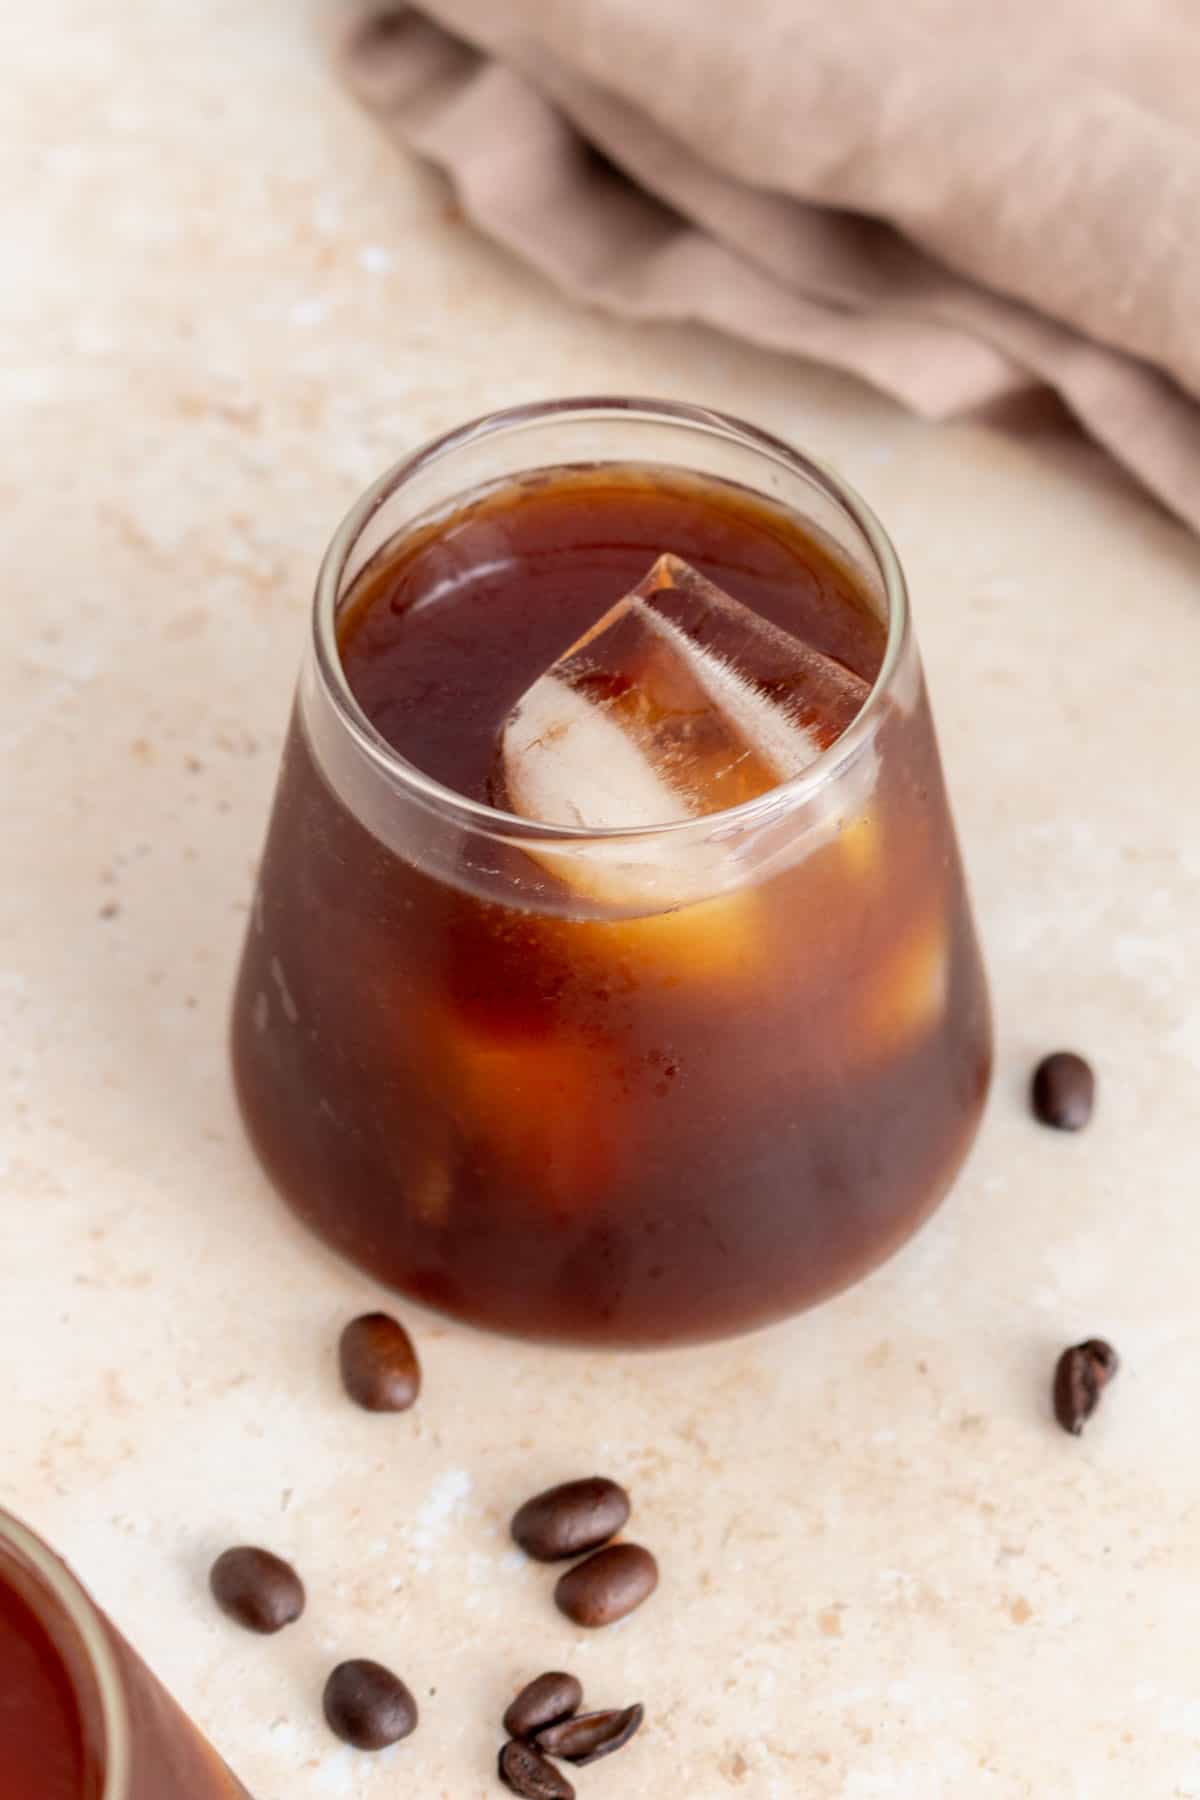 A glass of cold brew with ice. Coffee beans scattered around.